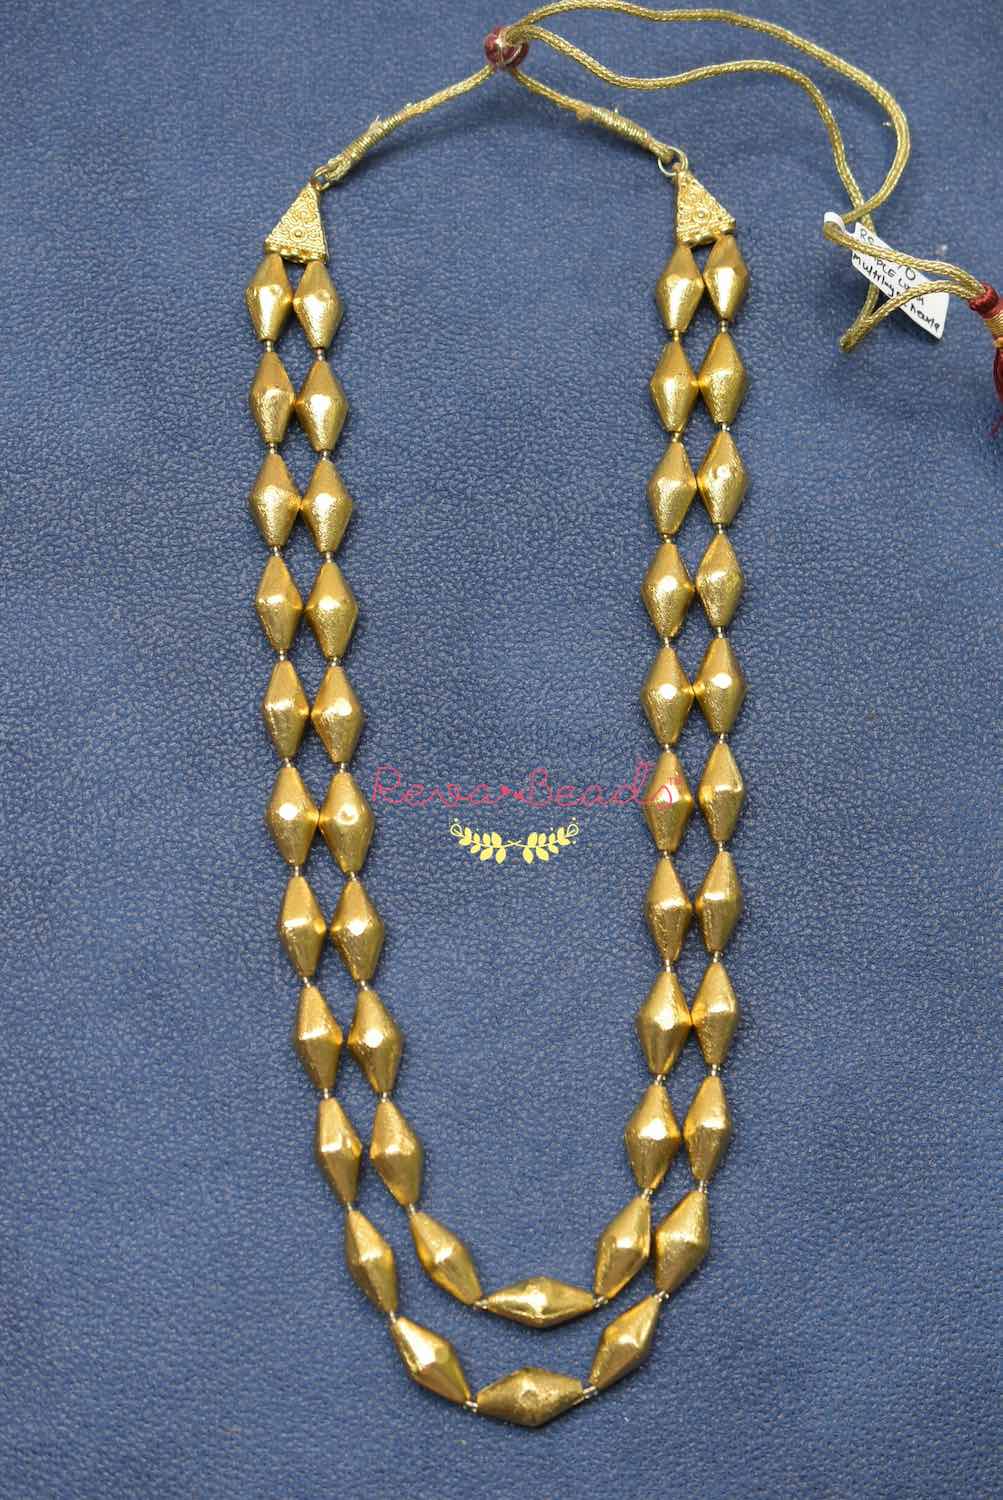 dholki beads necklace